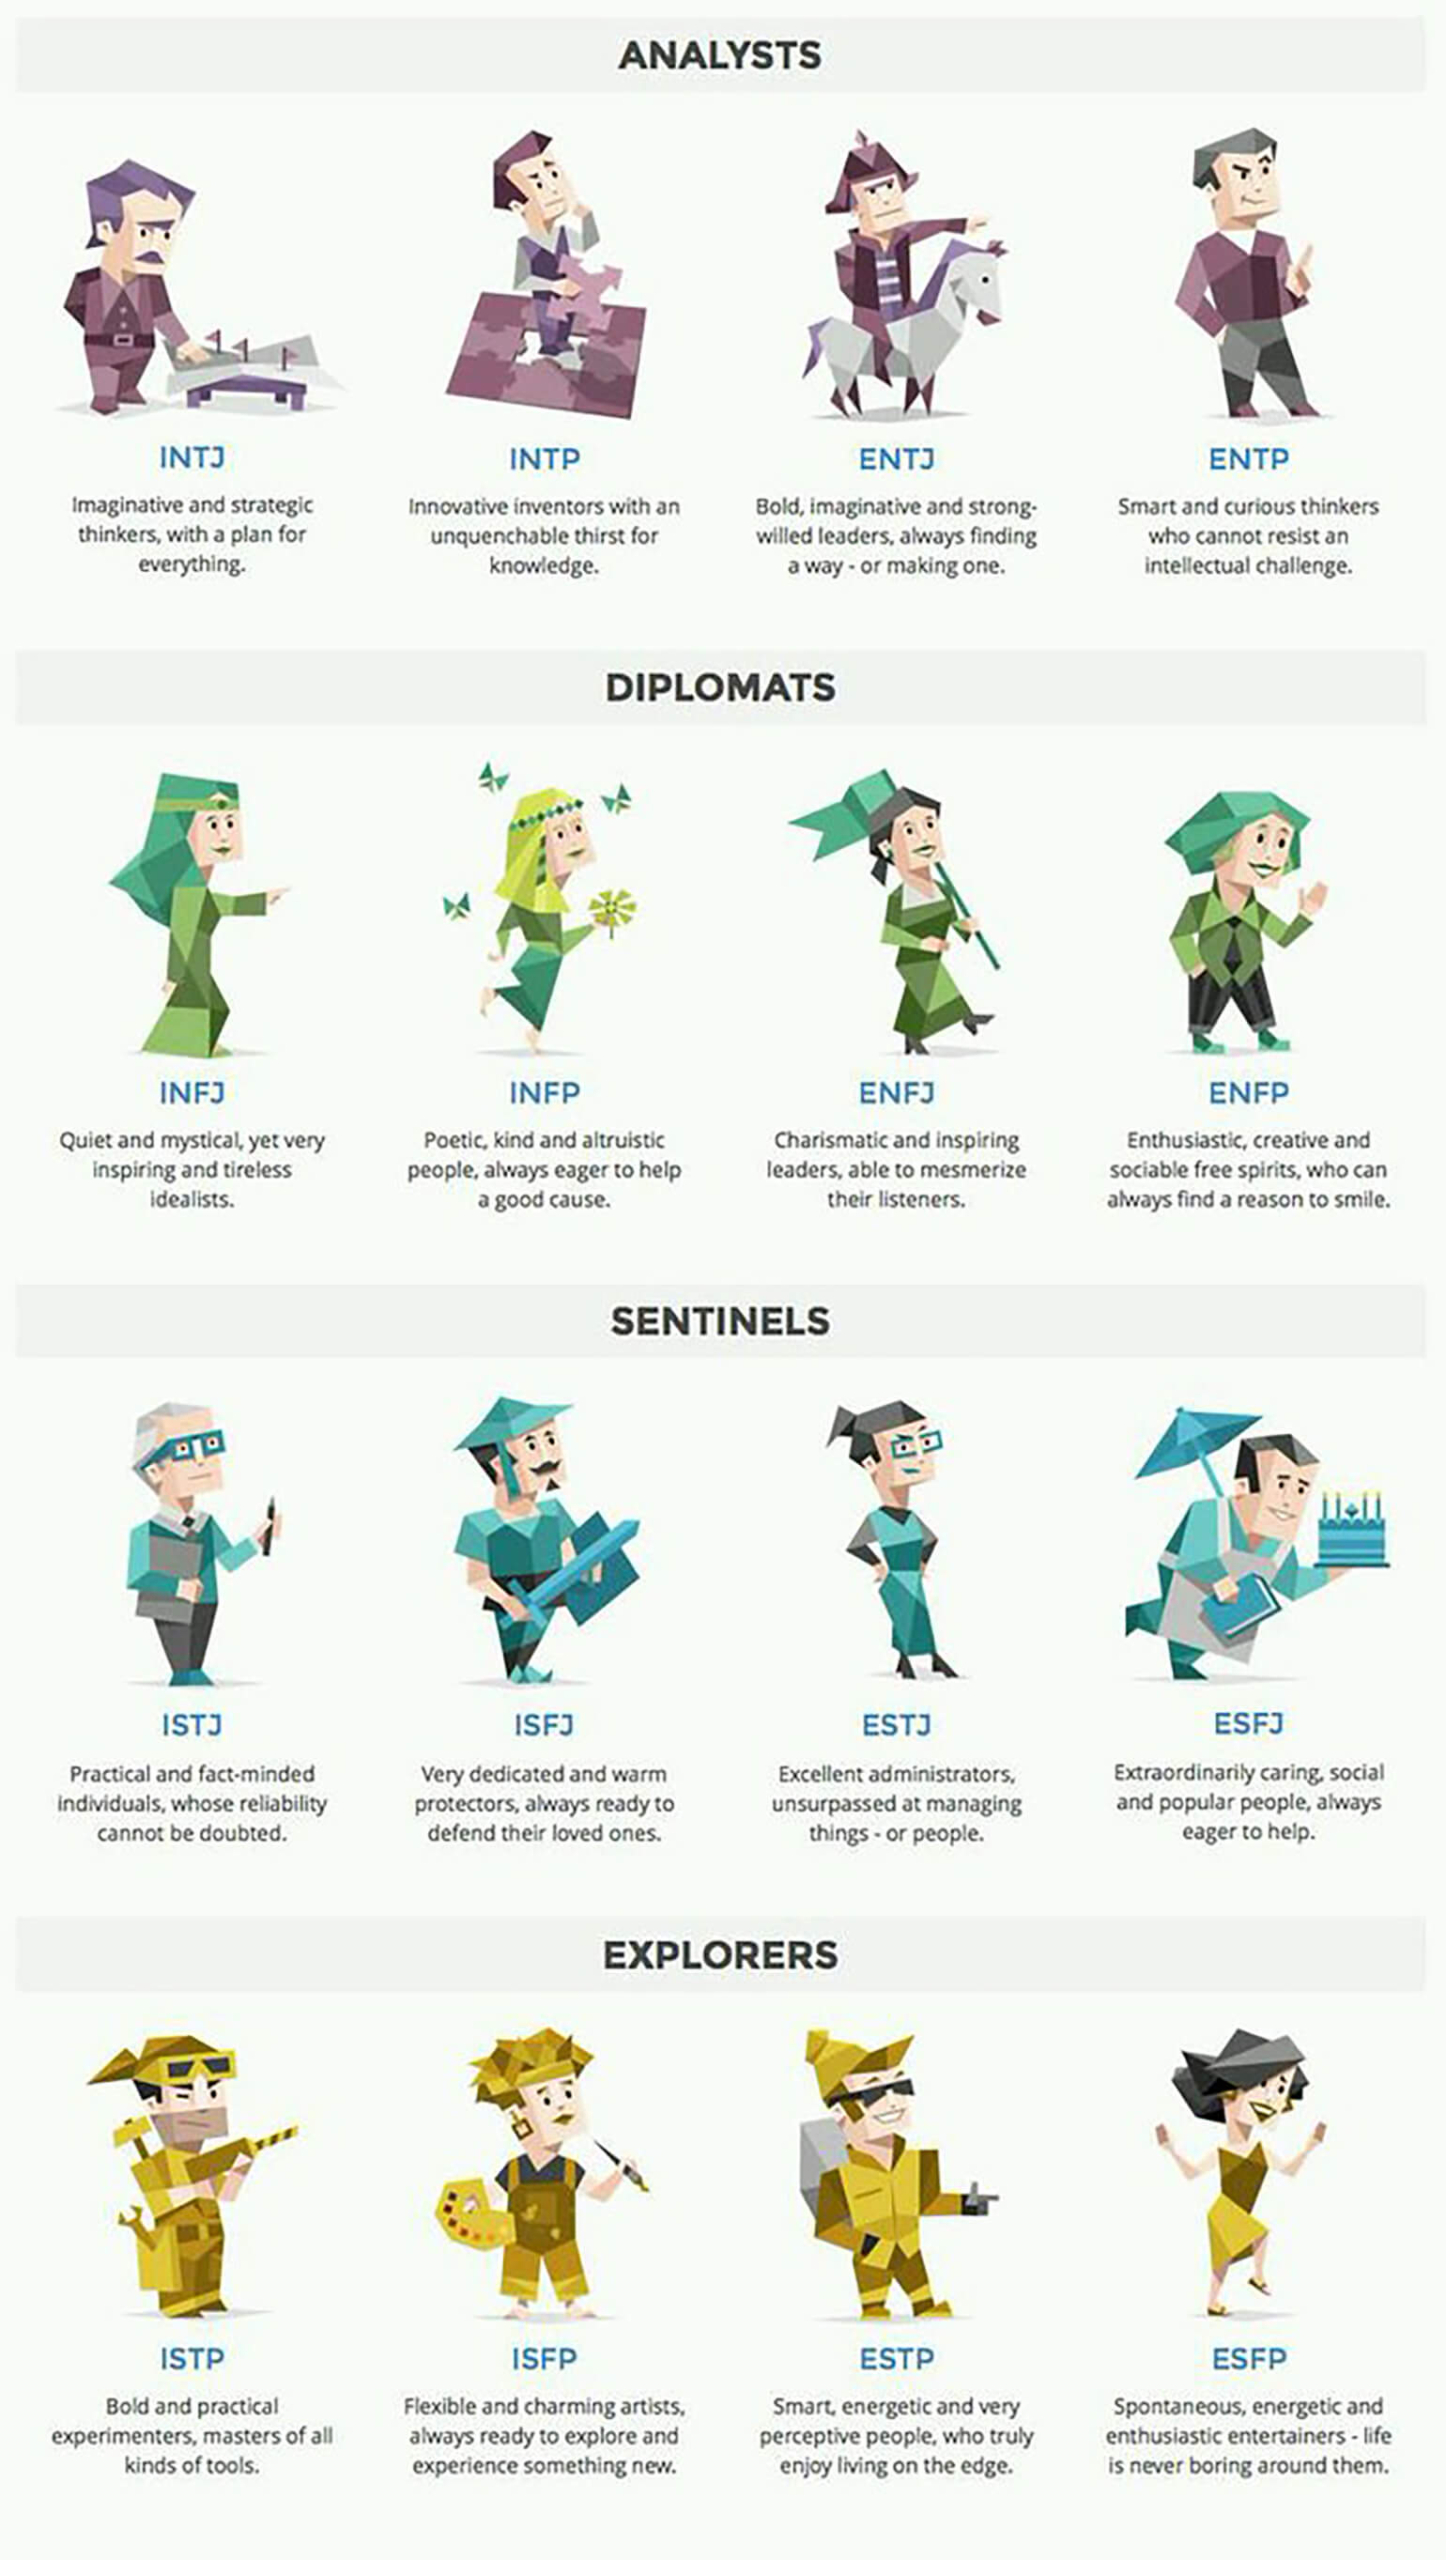 Picture describing different personality types: Analyst, Diplomats, Sentinels and Explorers